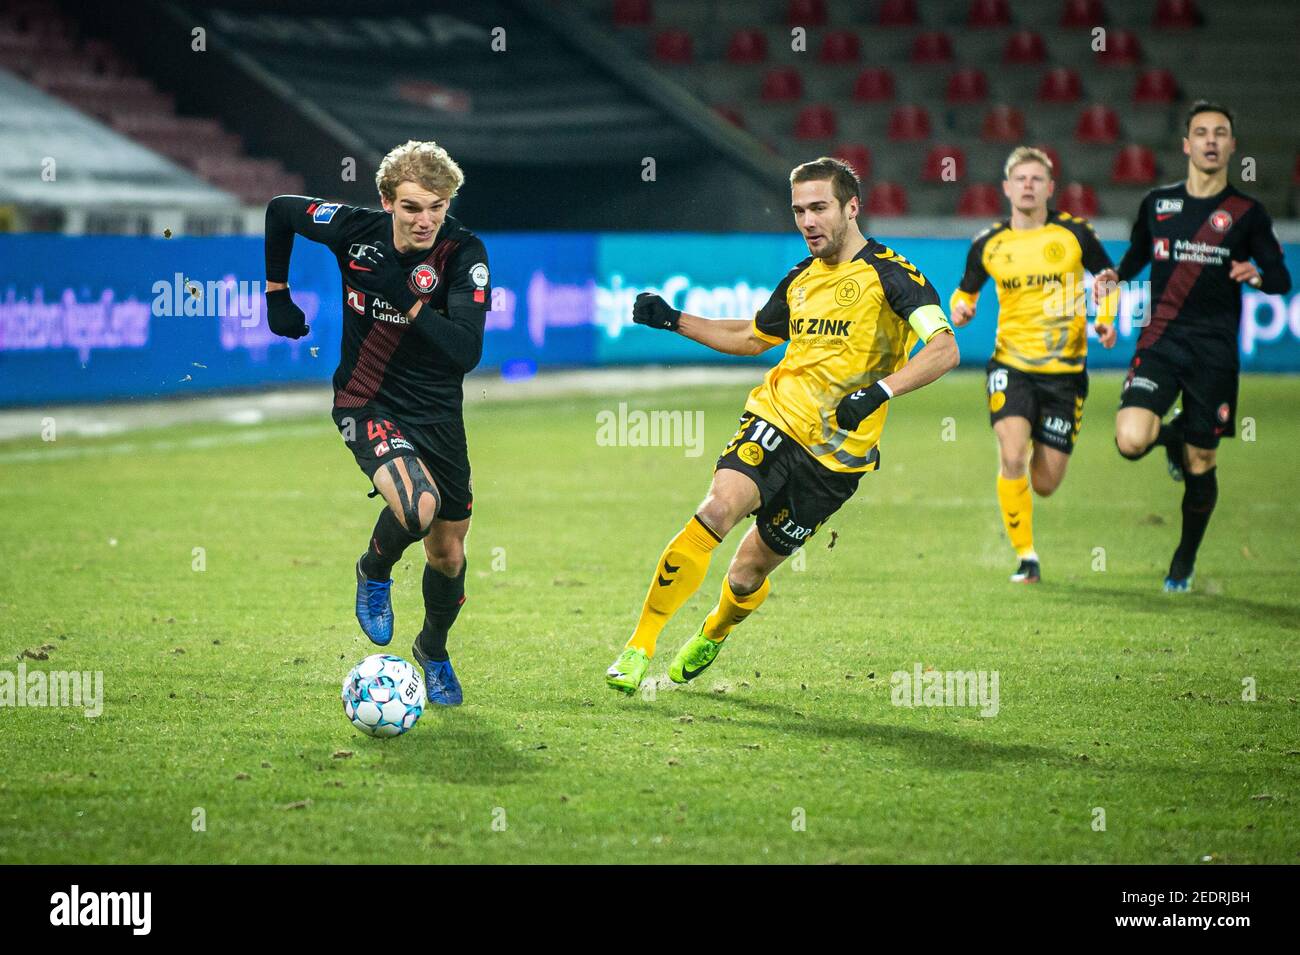 Herning, Denmark. 14th Feb, 2021. Gustav Isaksen (45) of FC Midtjylland and  Hallur Hansson (10) of AC Horsens seen during the 3F Superliga match  between FC Midtjylland and AC Horsens at MCH